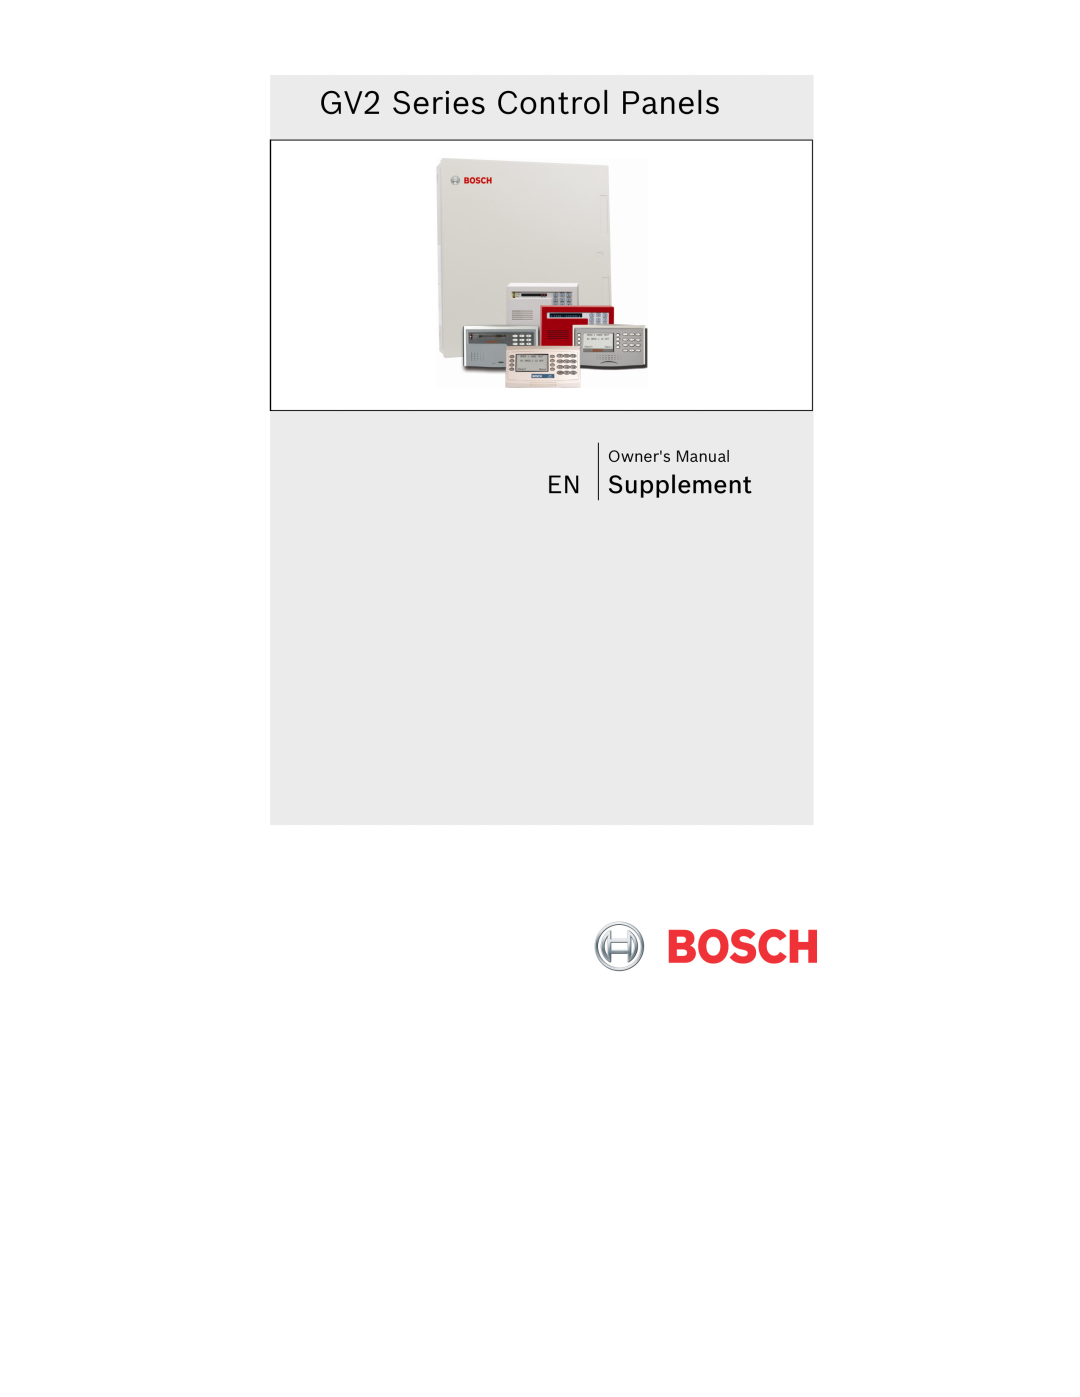 Bosch Appliances owner manual GV2 Series Control Panels, Supplement 